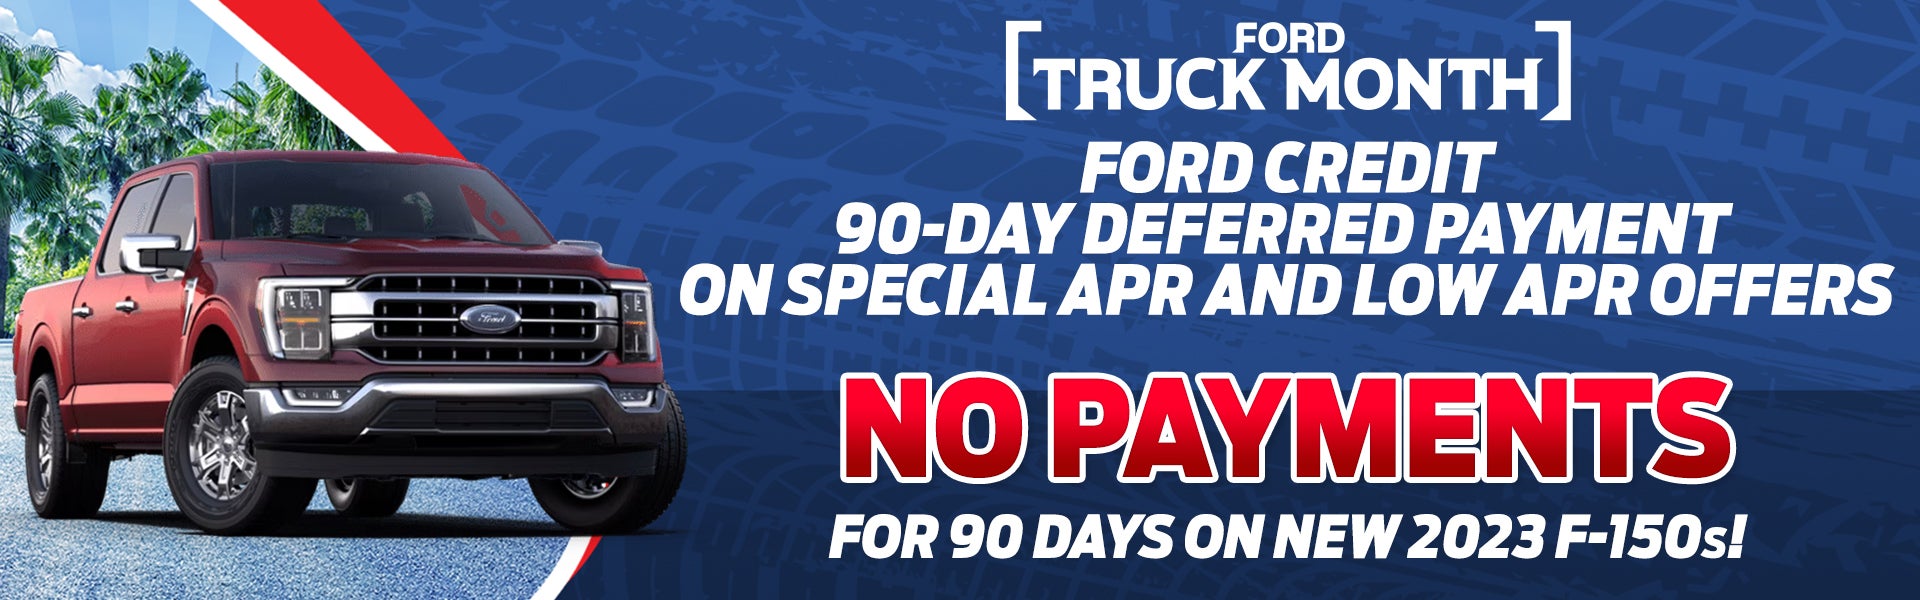 No Payments for 90 Days on New 2023 F-150s